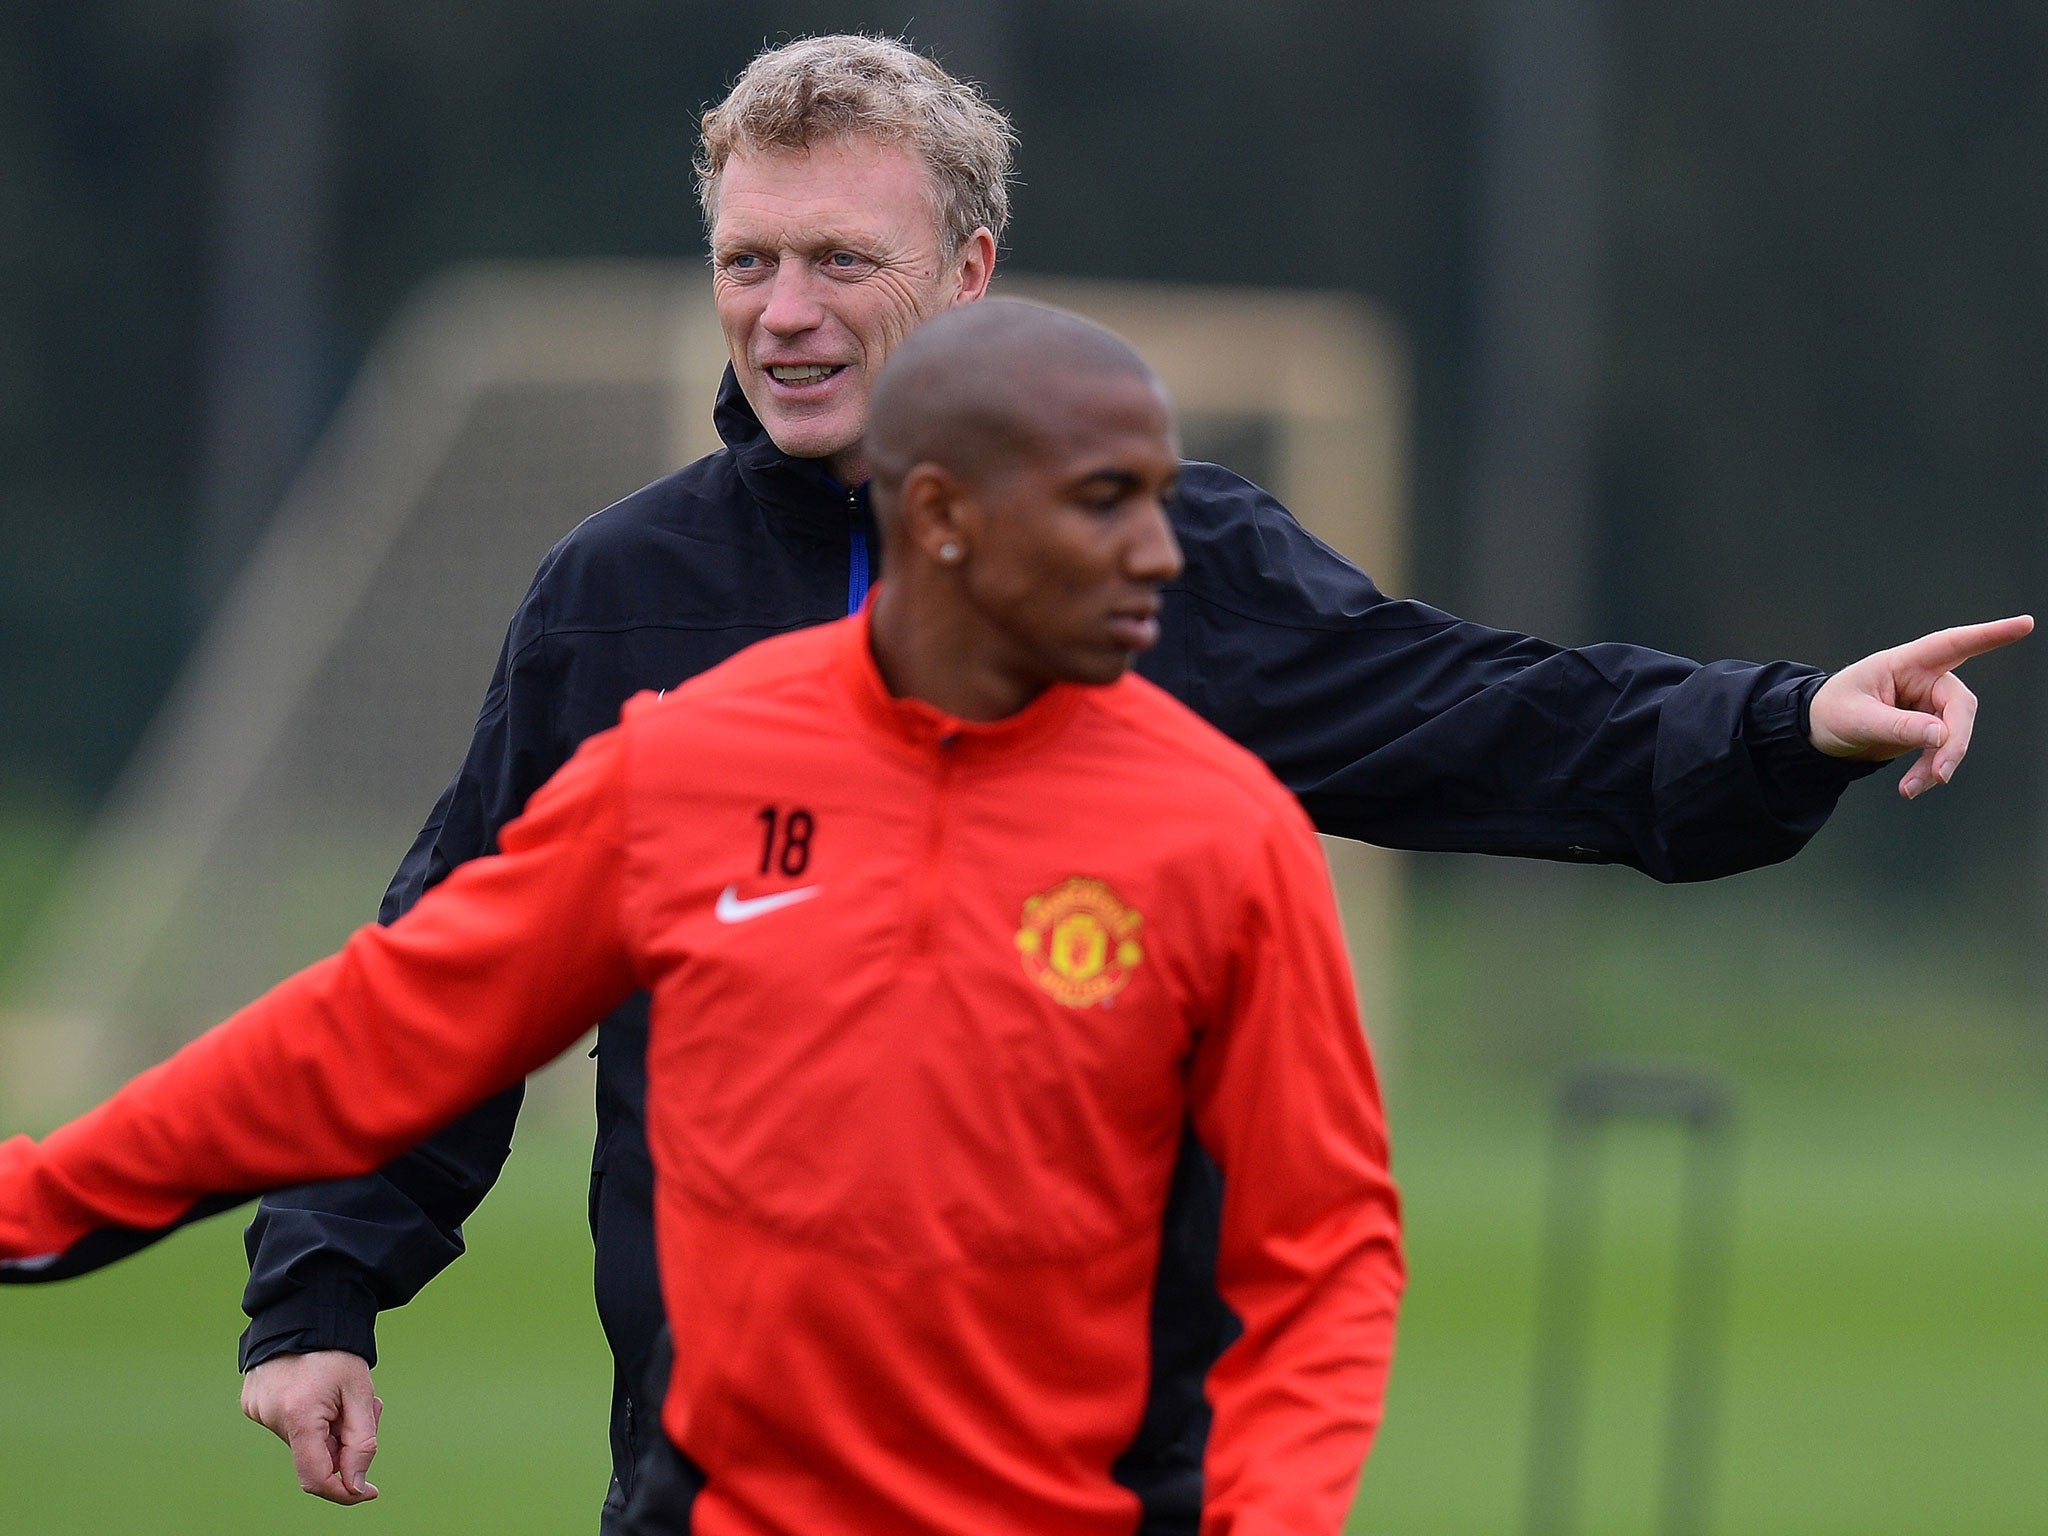 Manchester United manager David Moyes (L) and Manchester United's English midfielder Ashley Young